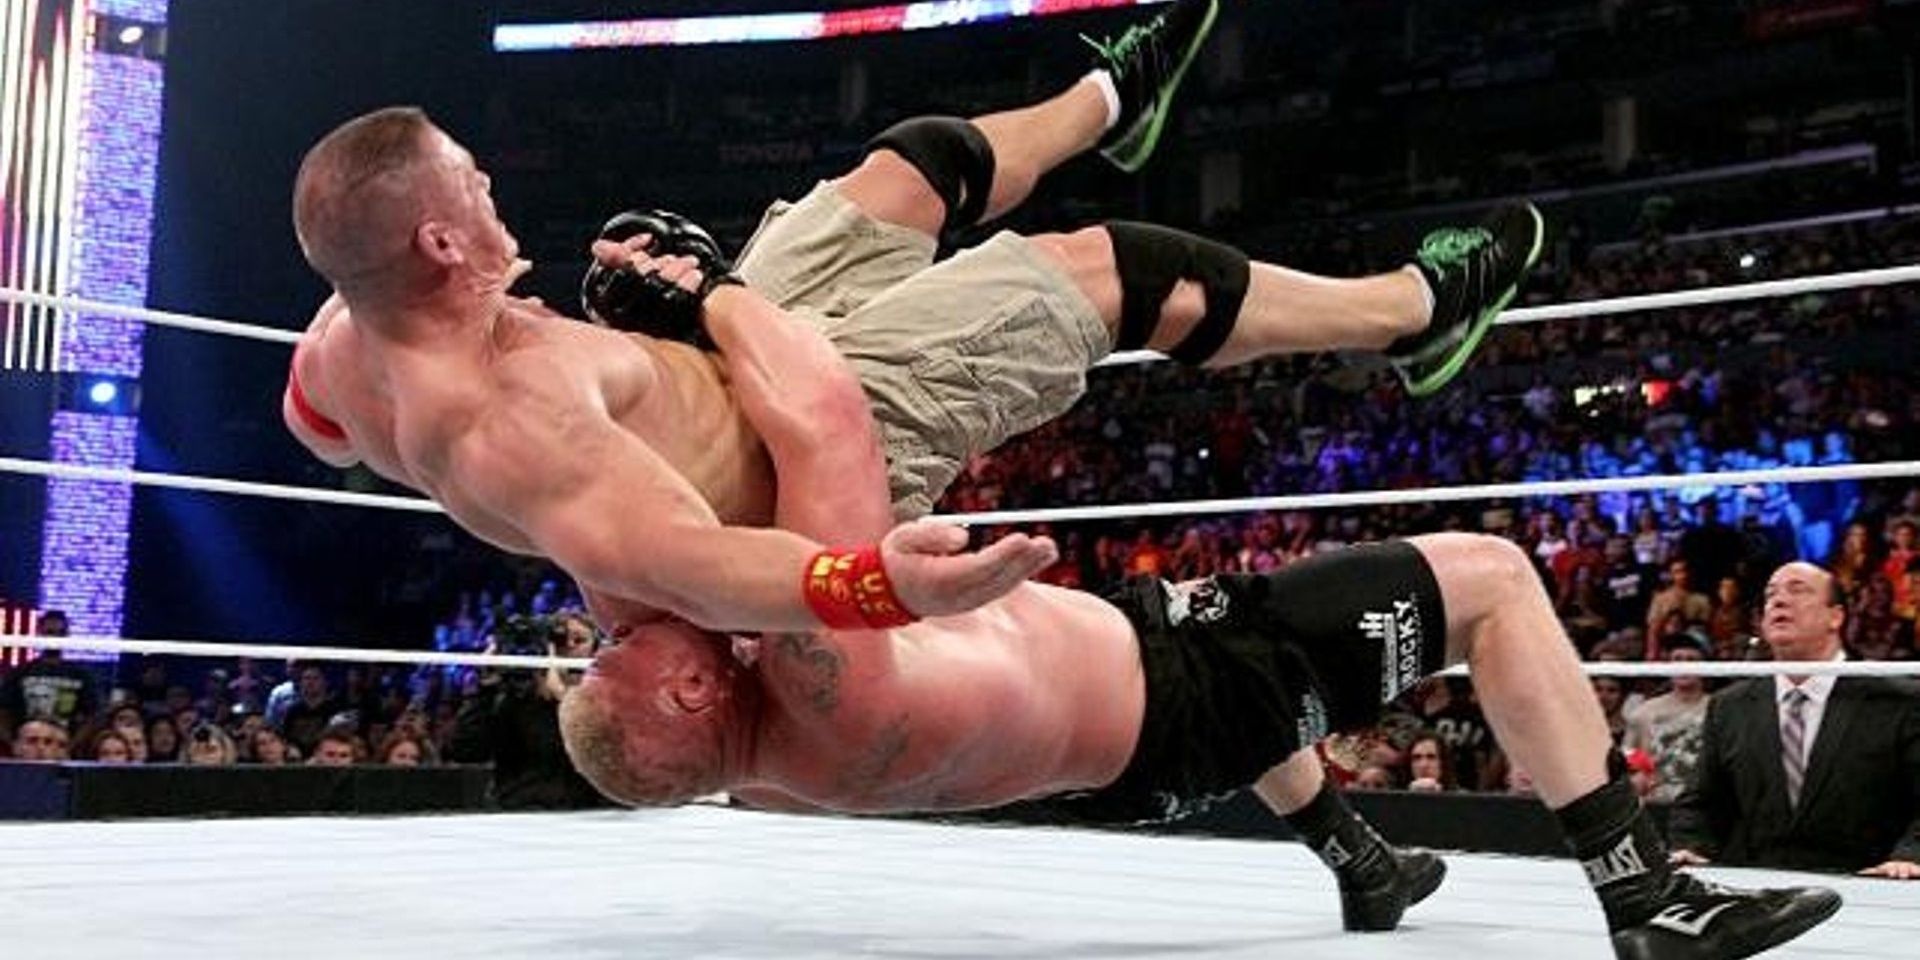 Cena and Lesnar clashed at SummerSlam 2014 for the WWE Championship